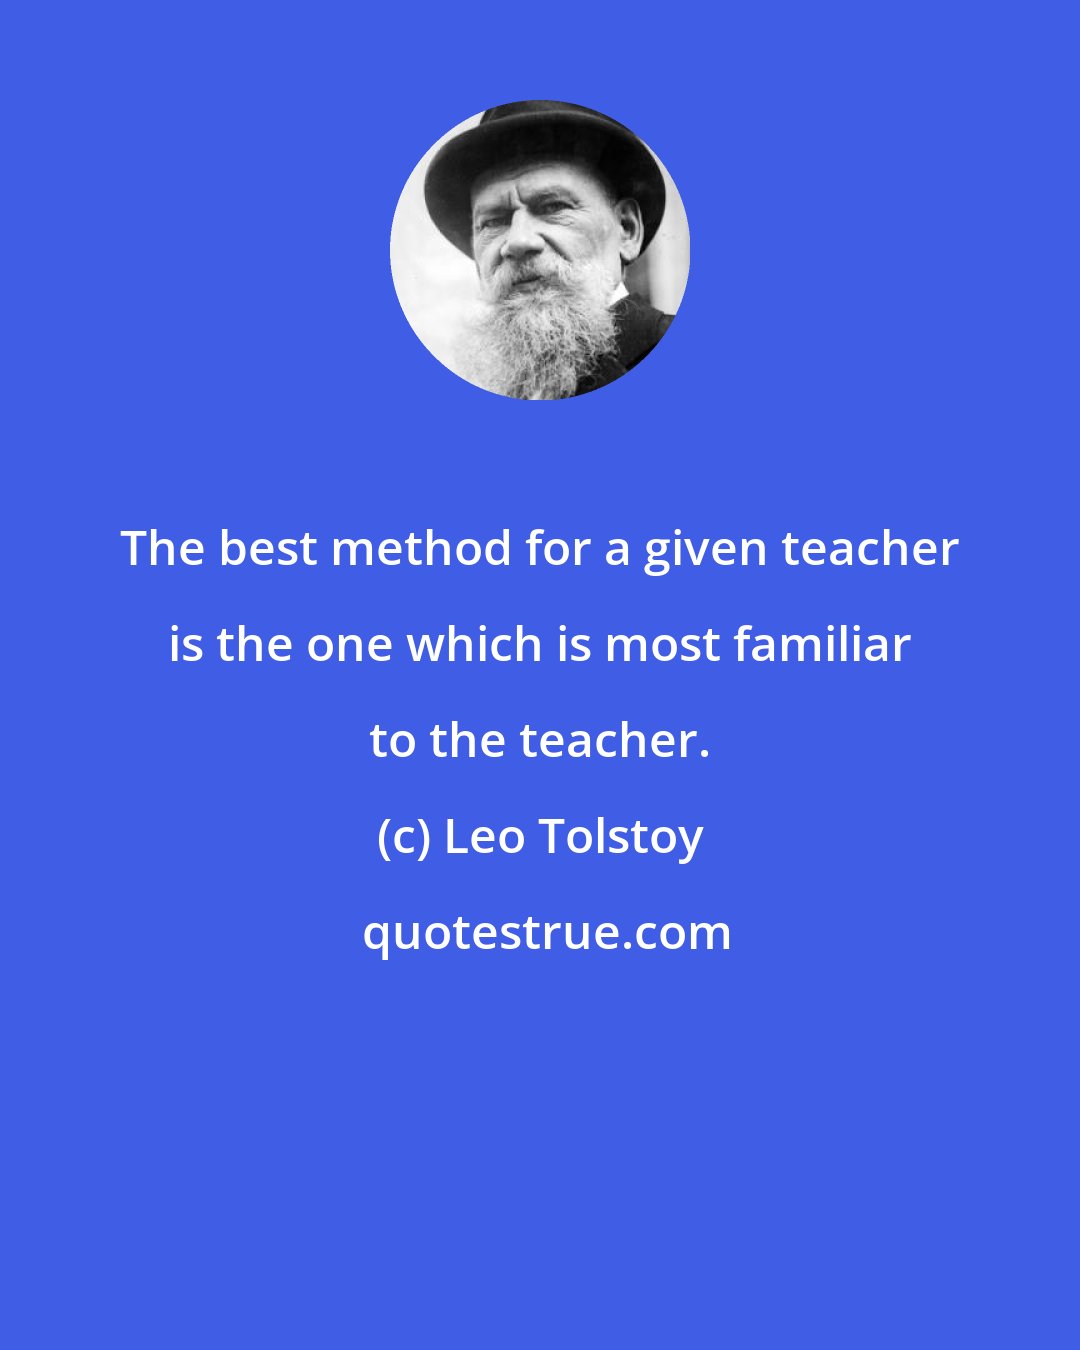 Leo Tolstoy: The best method for a given teacher is the one which is most familiar to the teacher.